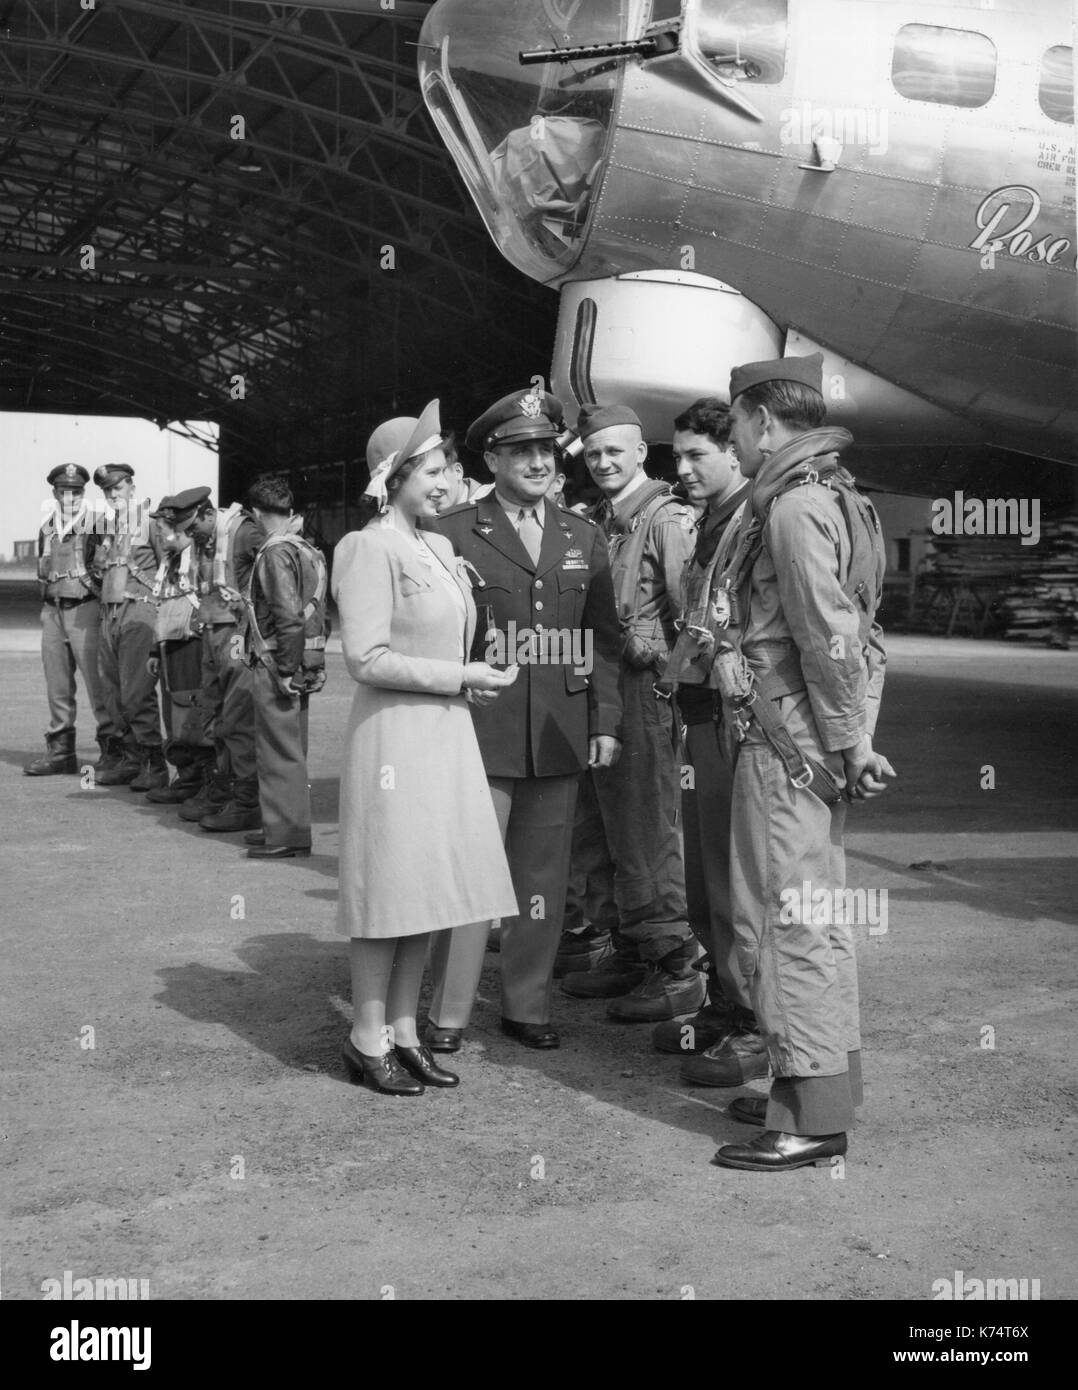 Princess Elizabeth chats with crew at the christening of the Boeing B-17 Flying Fortress 'Rose of York' at a base somewhere in England, England, 7/6/1944. Stock Photo